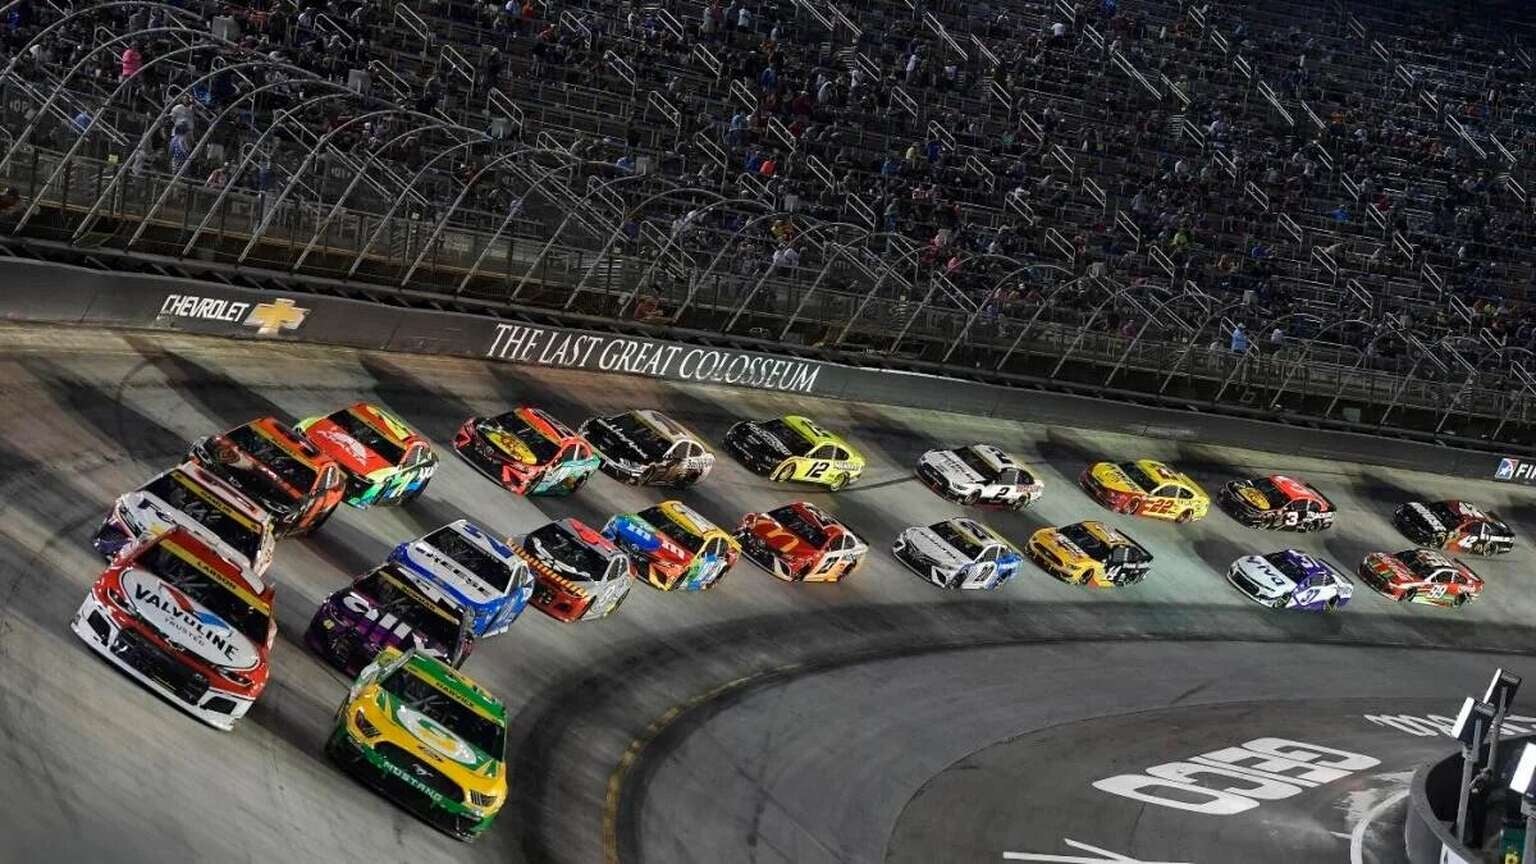 How to Watch the NASCAR Cup Series Bass Pro Shops Night Race Live Online Without Cable